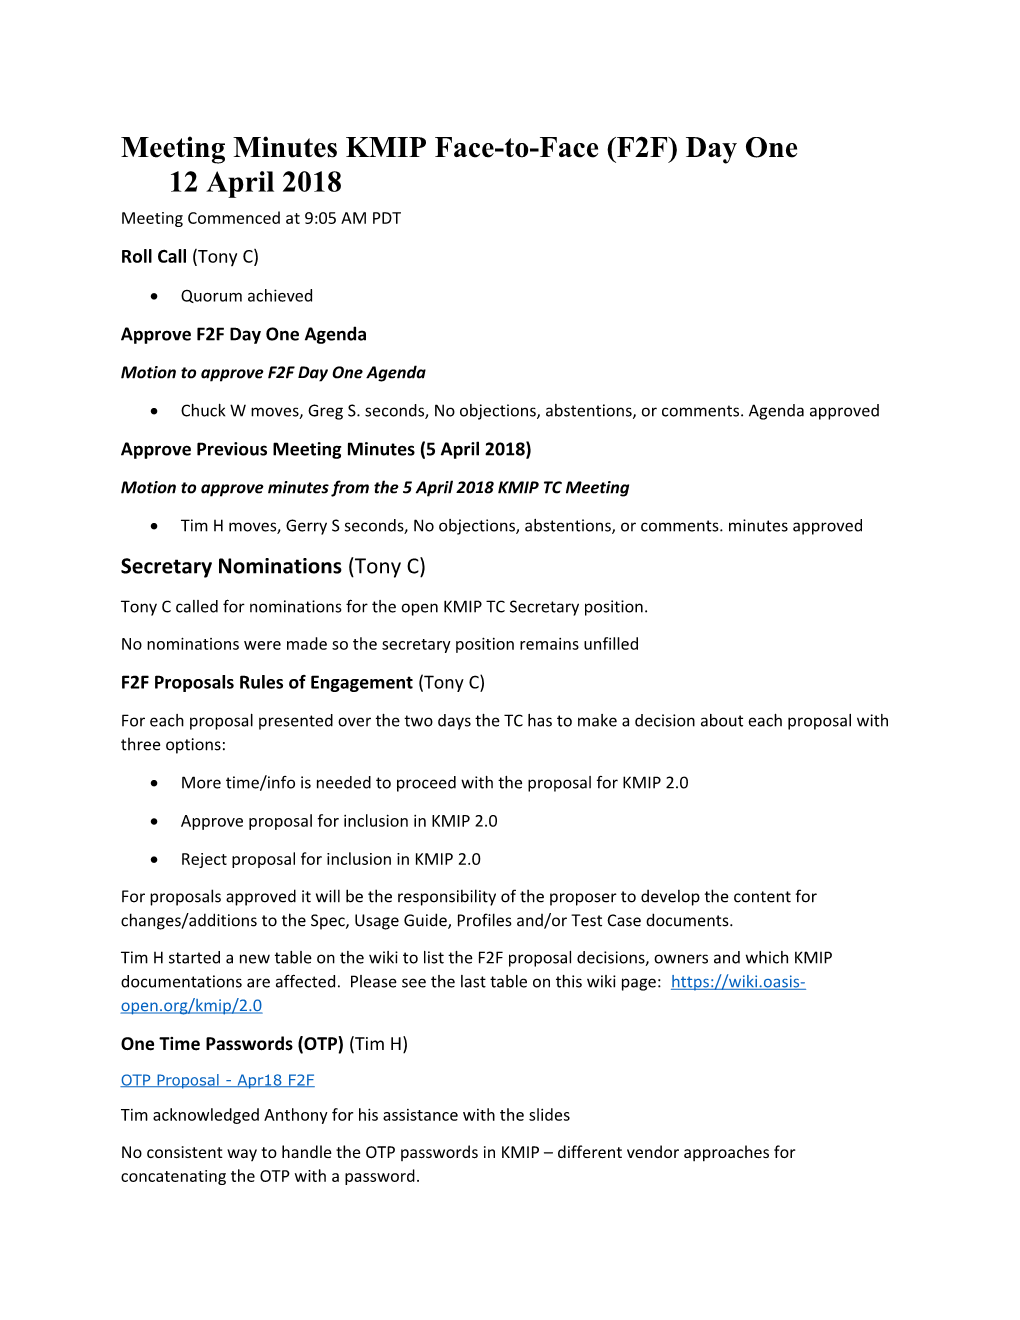 Meeting Minutes KMIP Face-To-Face (F2F) Day One 12April 2018